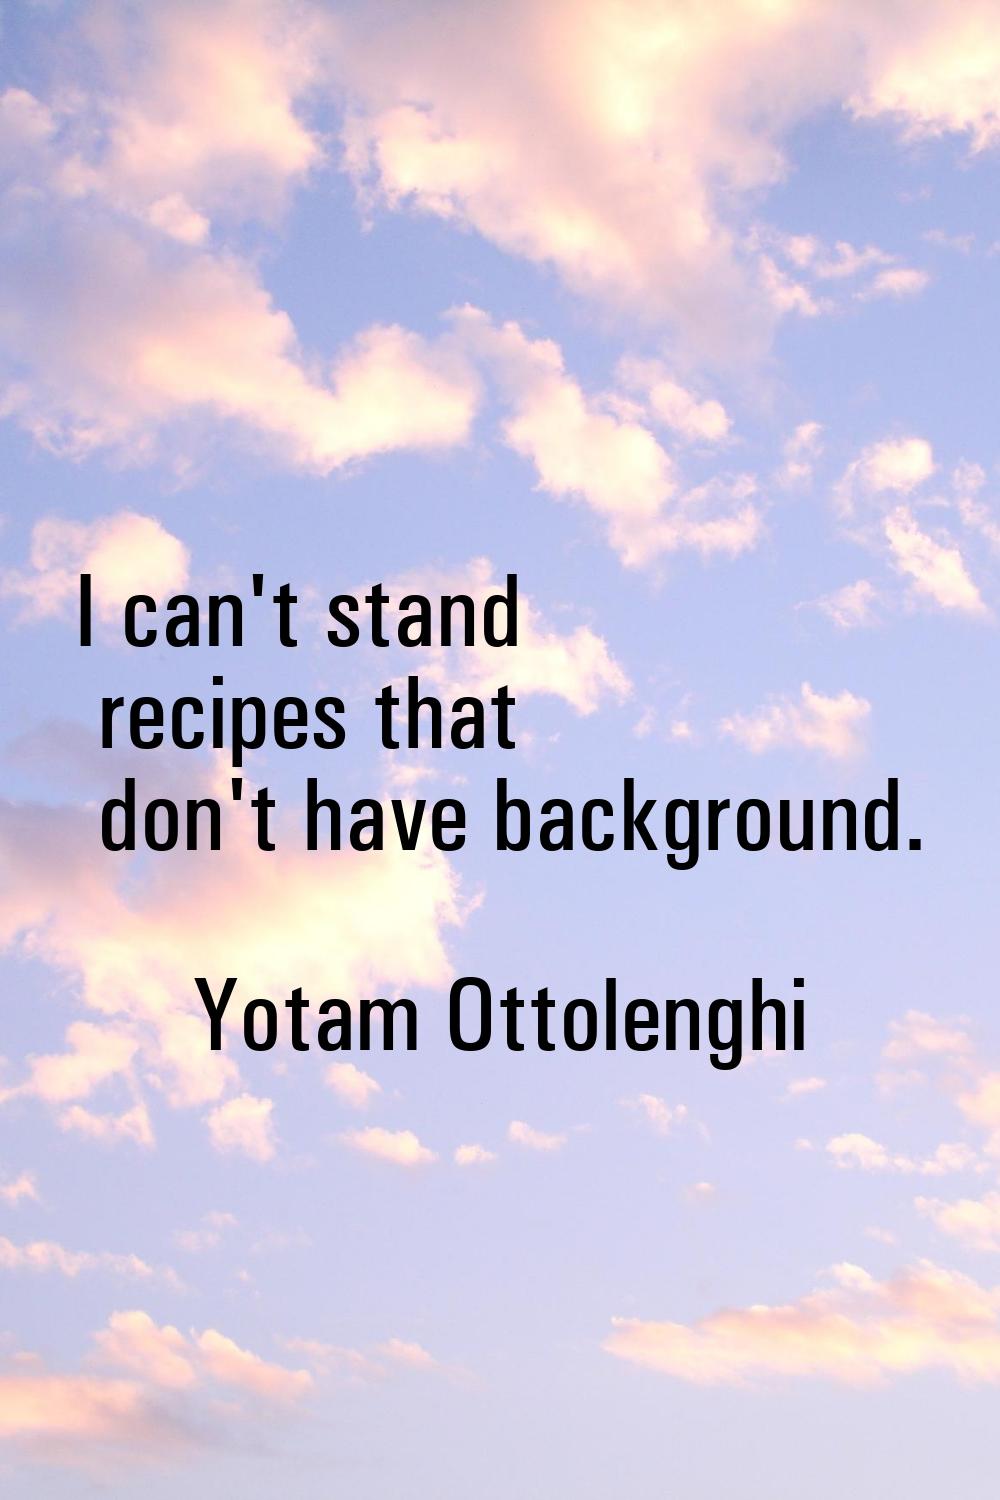 I can't stand recipes that don't have background.